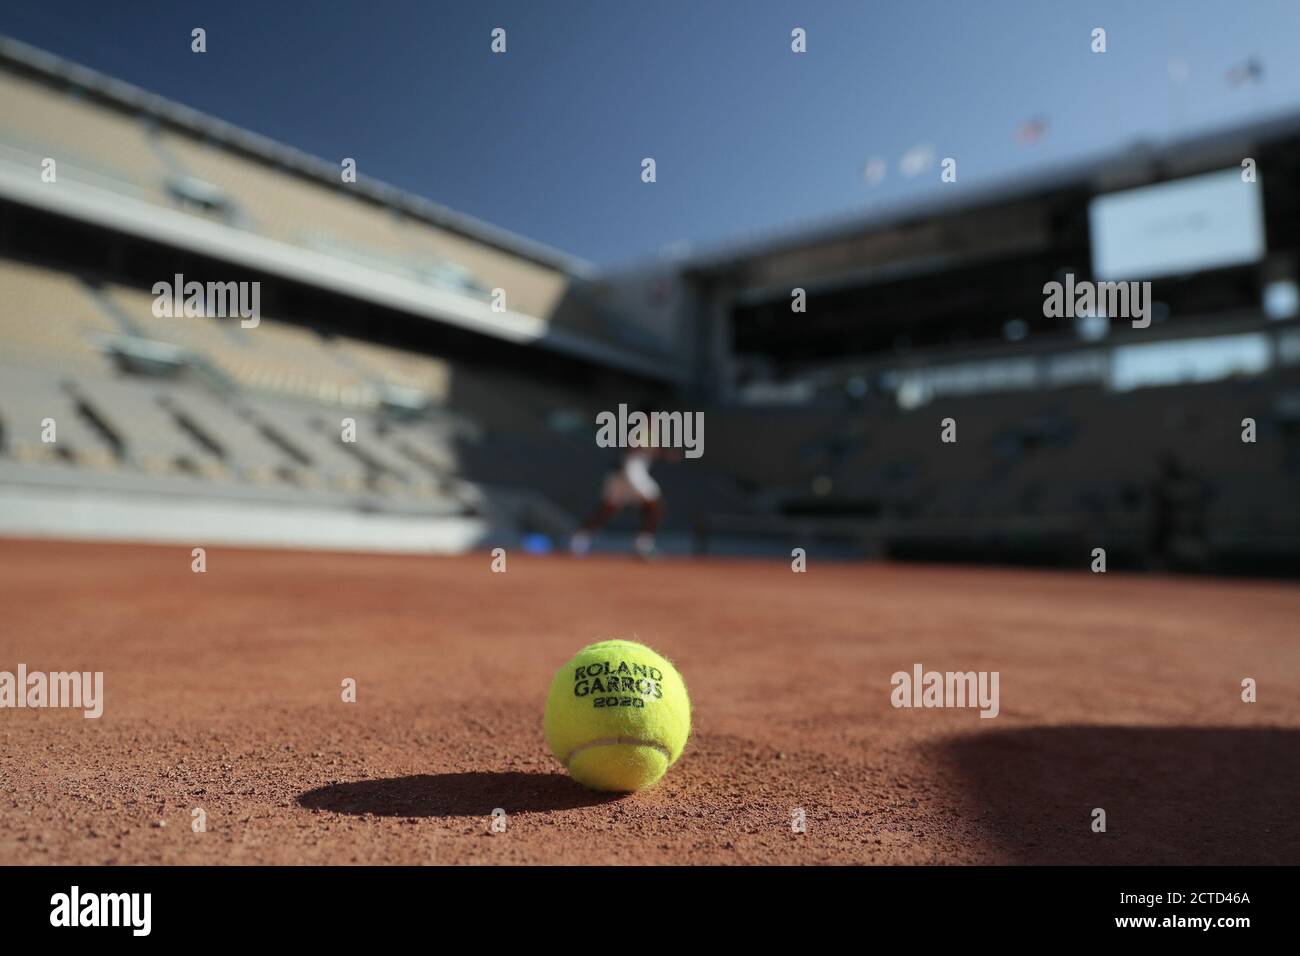 Illustration of official tennis ball Roland Garros 2020 by Wilson over the clay of Philippe Chatrier court under the CoVid health crisis 19 during the Stock Photo